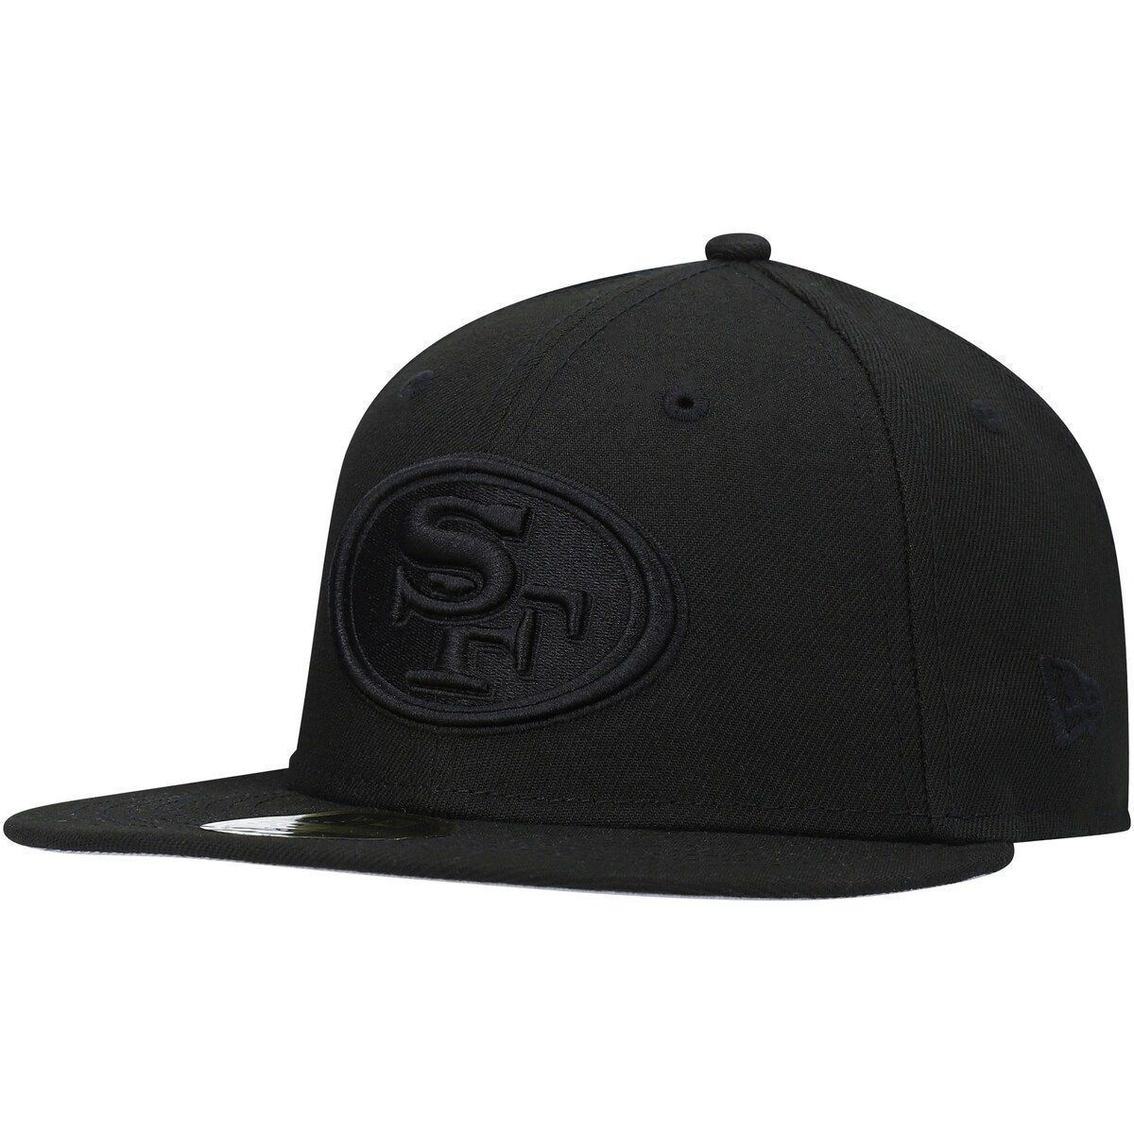 New Era Men's Black San Francisco 49ers Black on Black Low 59FIFTY II Fitted Hat - Image 2 of 4